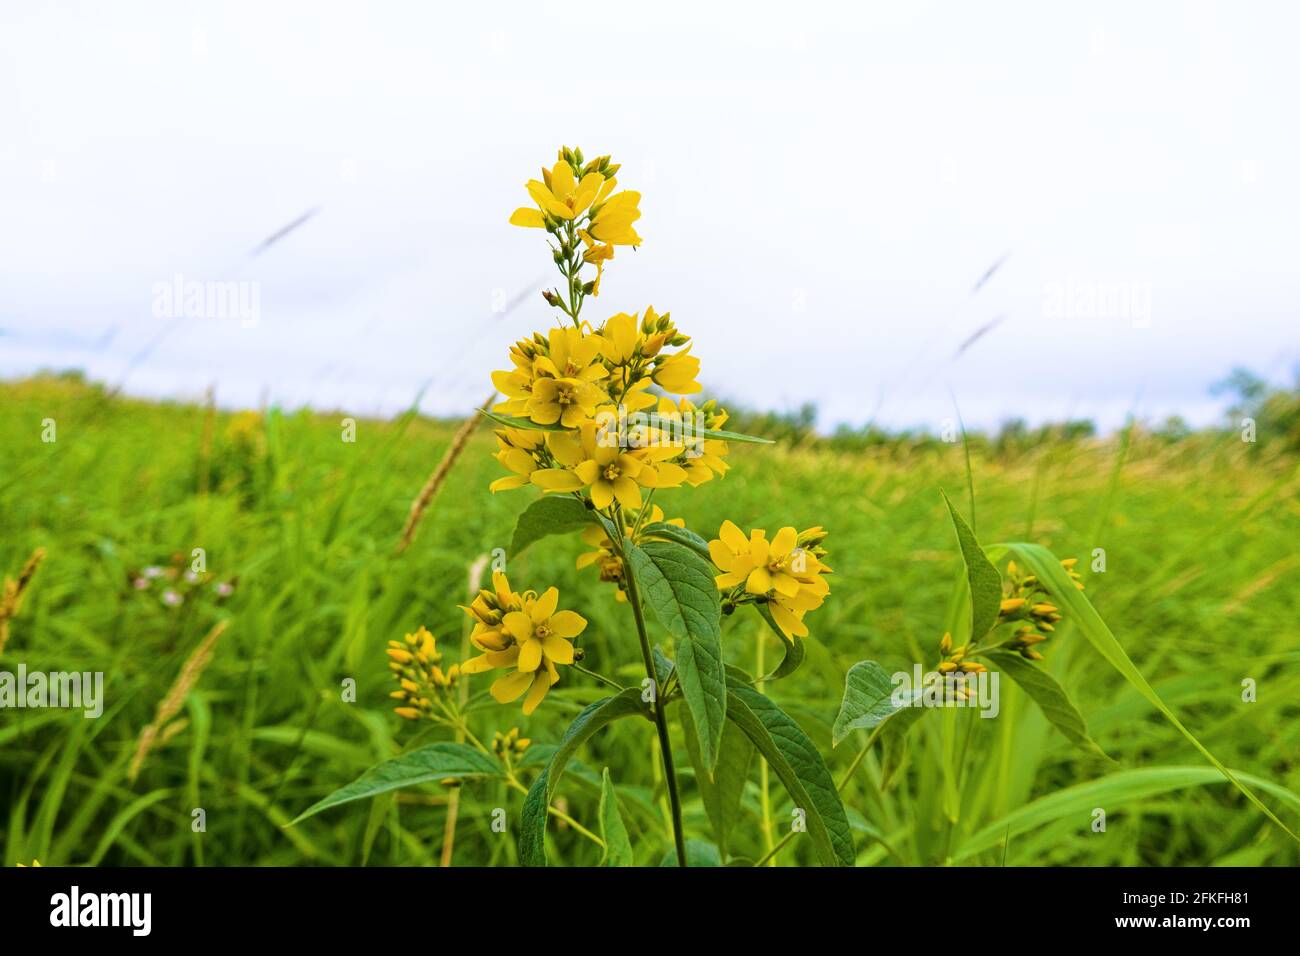 North Haughland. Golden Loosestrife (Willow-wort, Lysimachia vulgaris) on water (bottomland) meadows. The plant contains dyes that were used to color Stock Photo